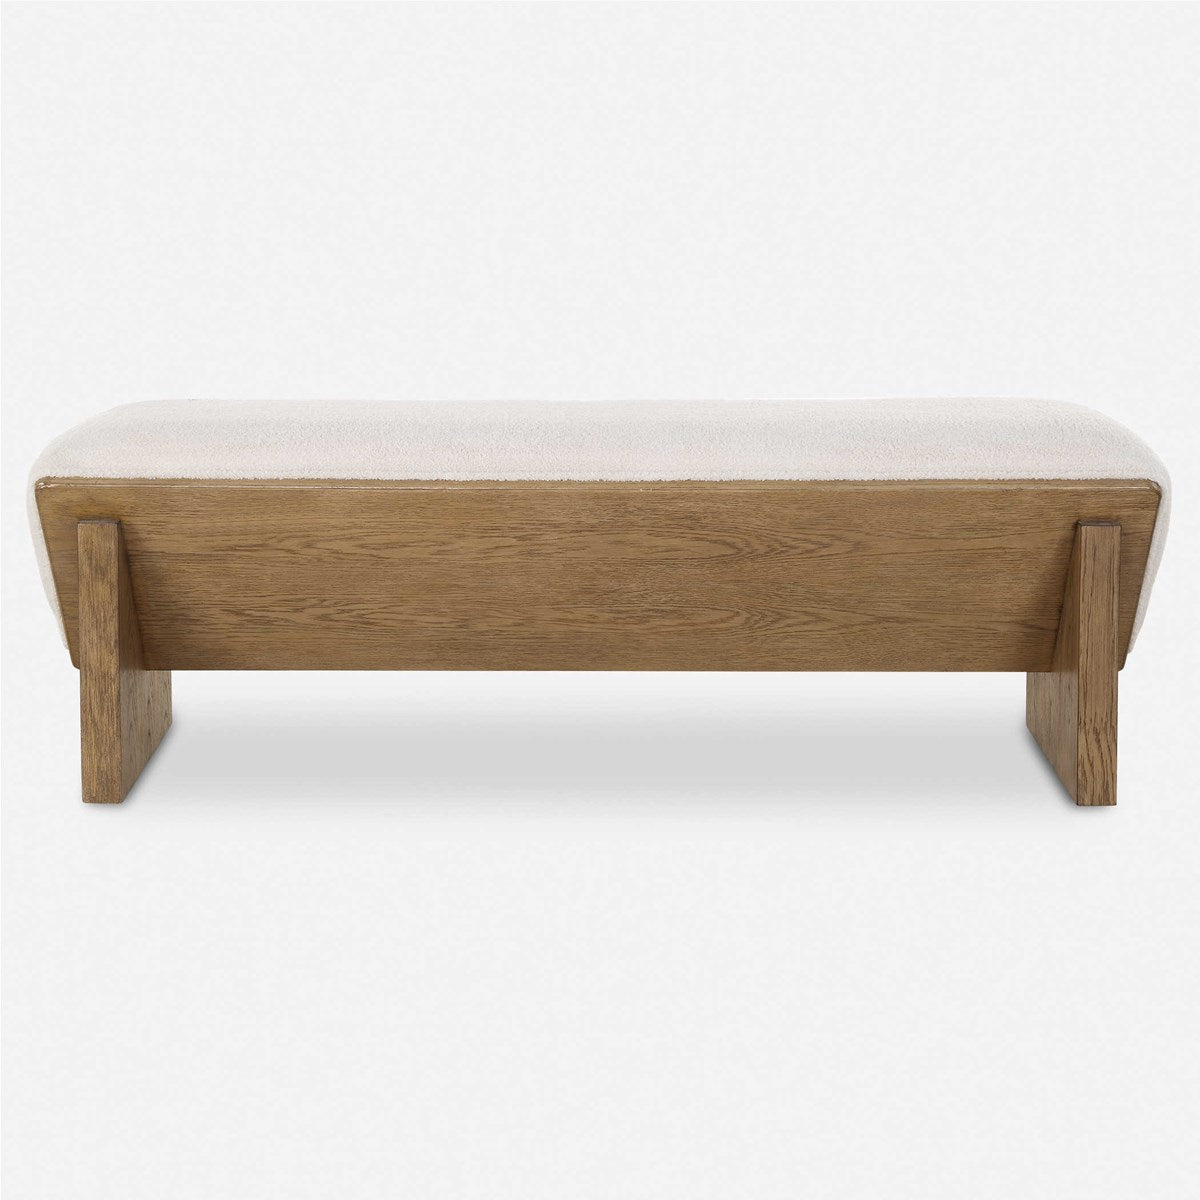 Uttermost - 23806 - Bench - Wedged - Soft Ivory